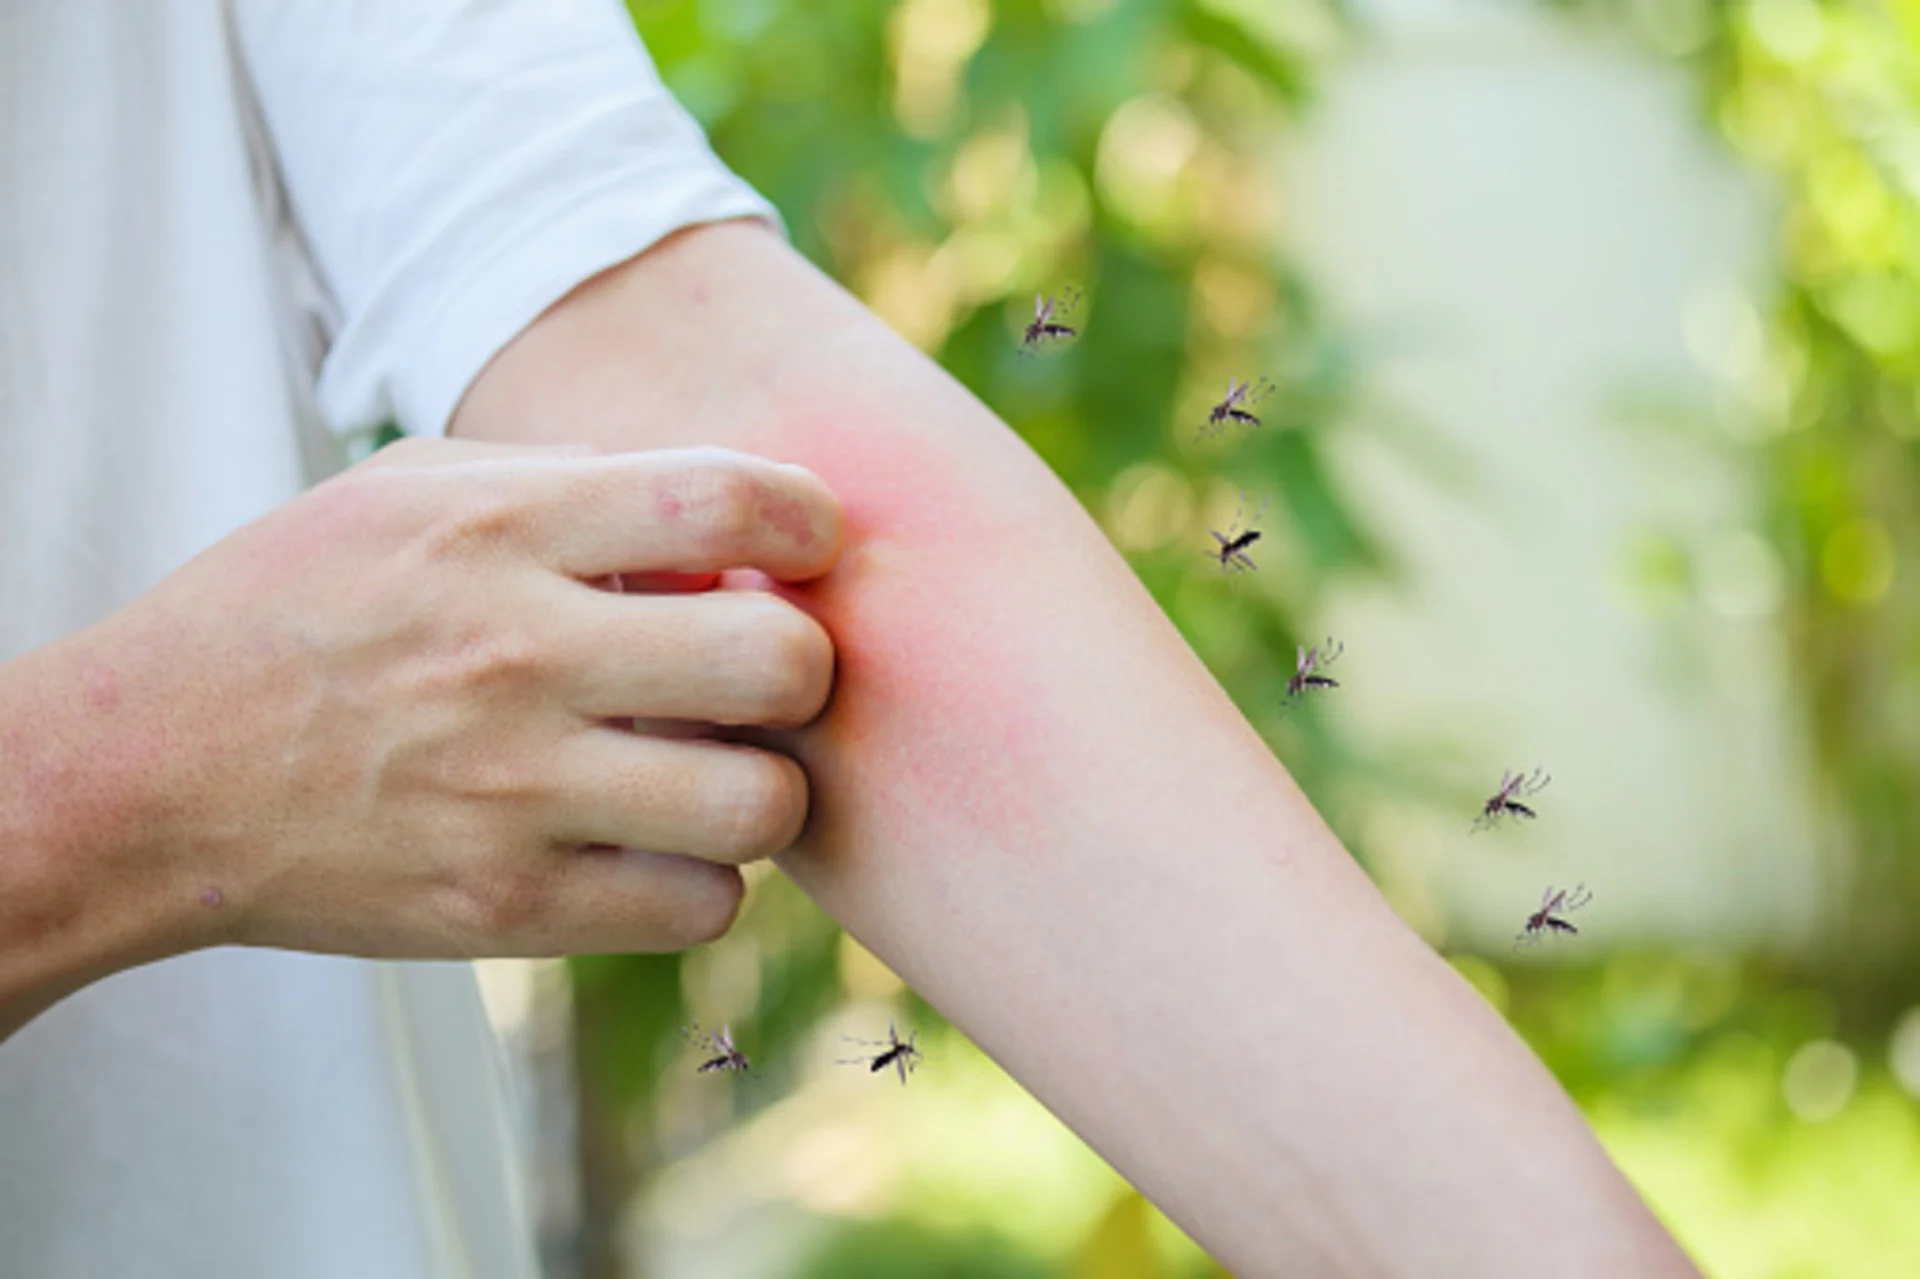 What you’re UNINTENTIONALLY doing to attract mosquitoes